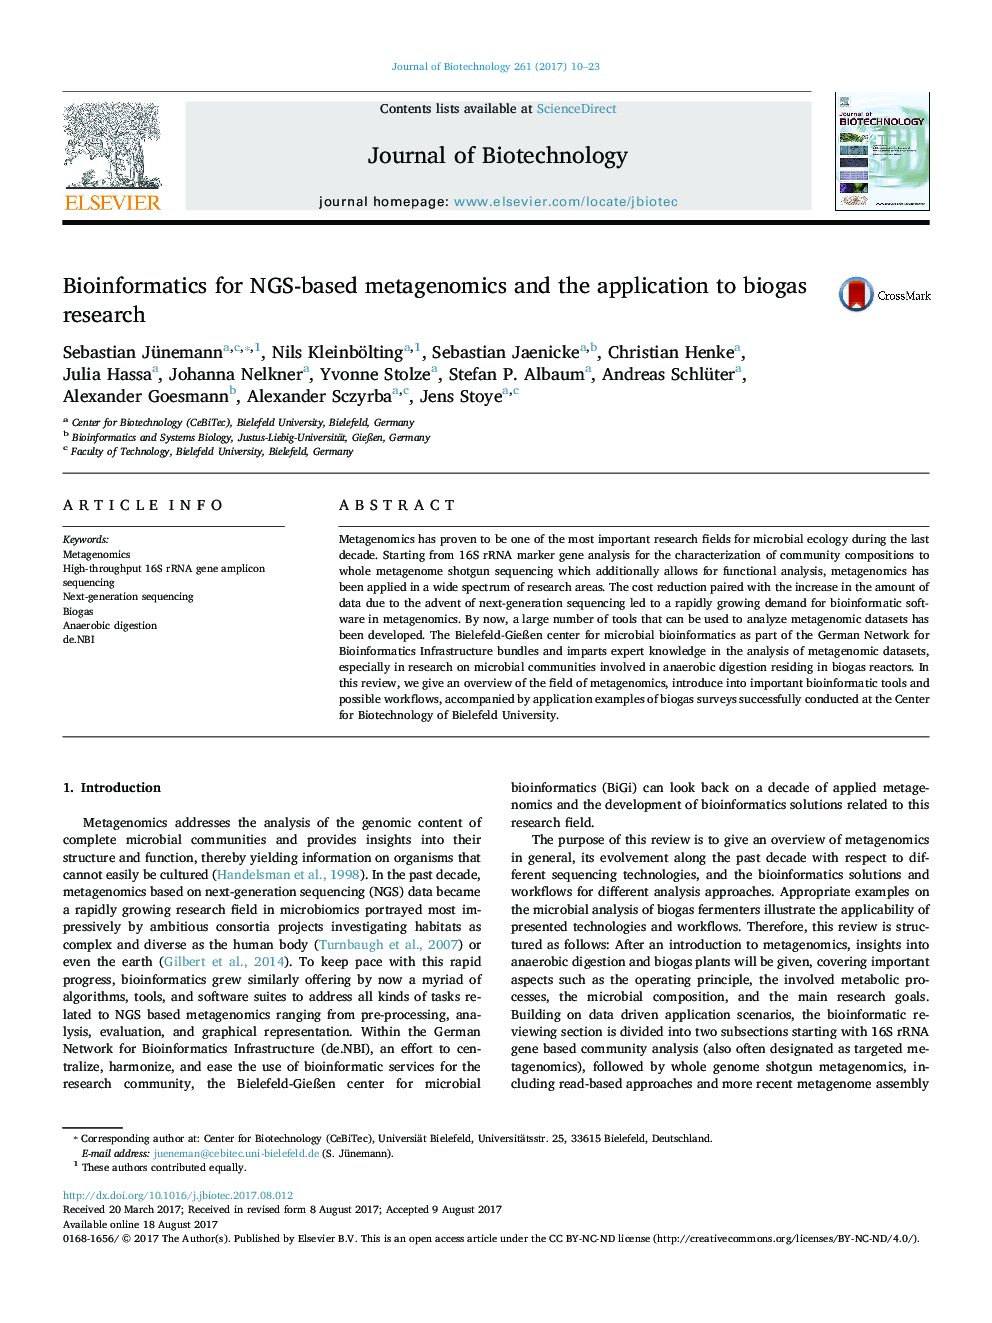 Bioinformatics for NGS-based metagenomics and the application to biogas research